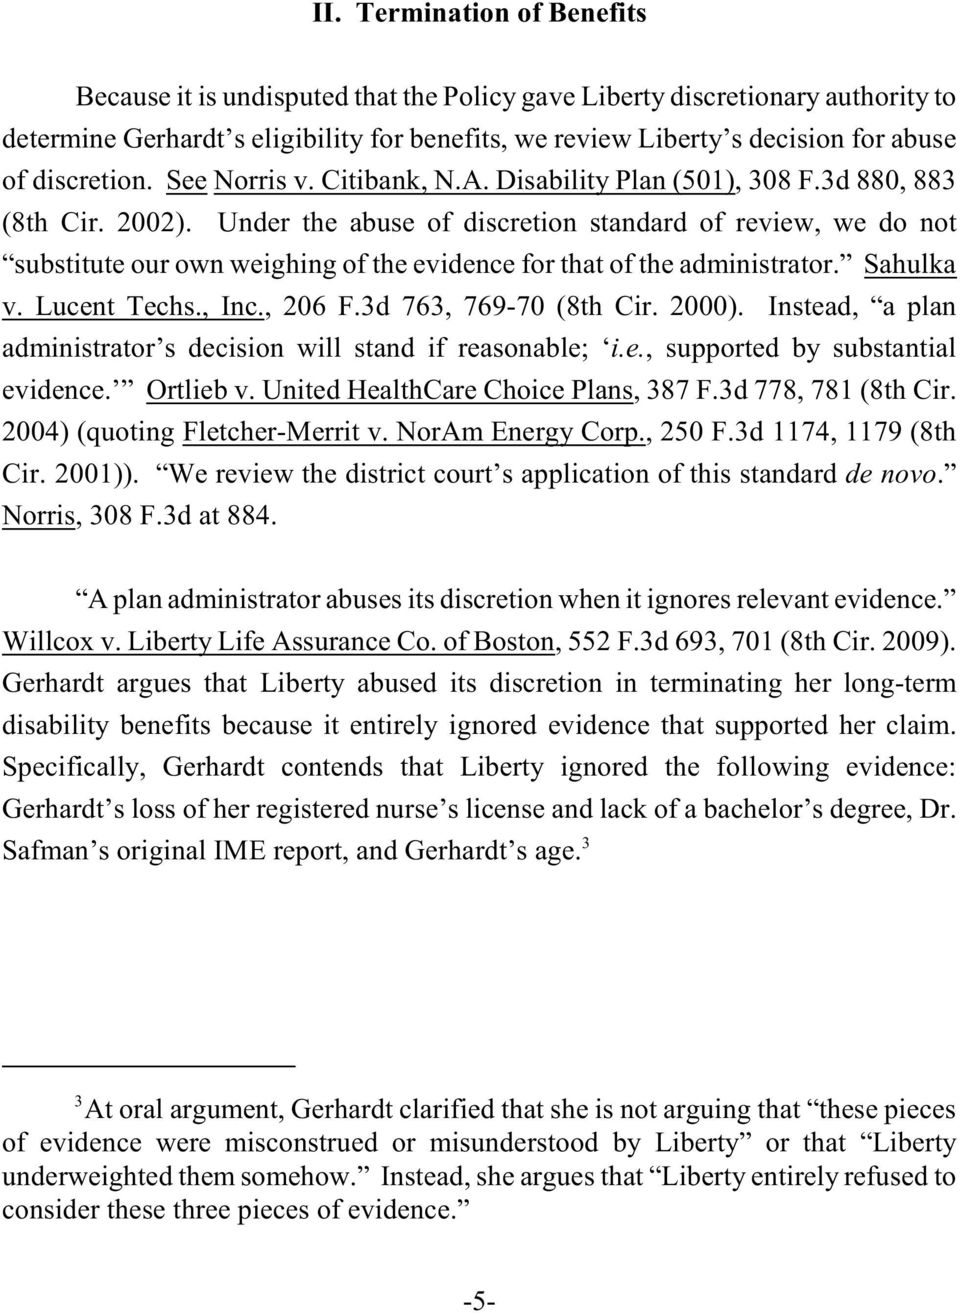 Under the abuse of discretion standard of review, we do not substitute our own weighing of the evidence for that of the administrator. Sahulka v. Lucent Techs., Inc., 206 F.3d 763, 769-70 (8th Cir.